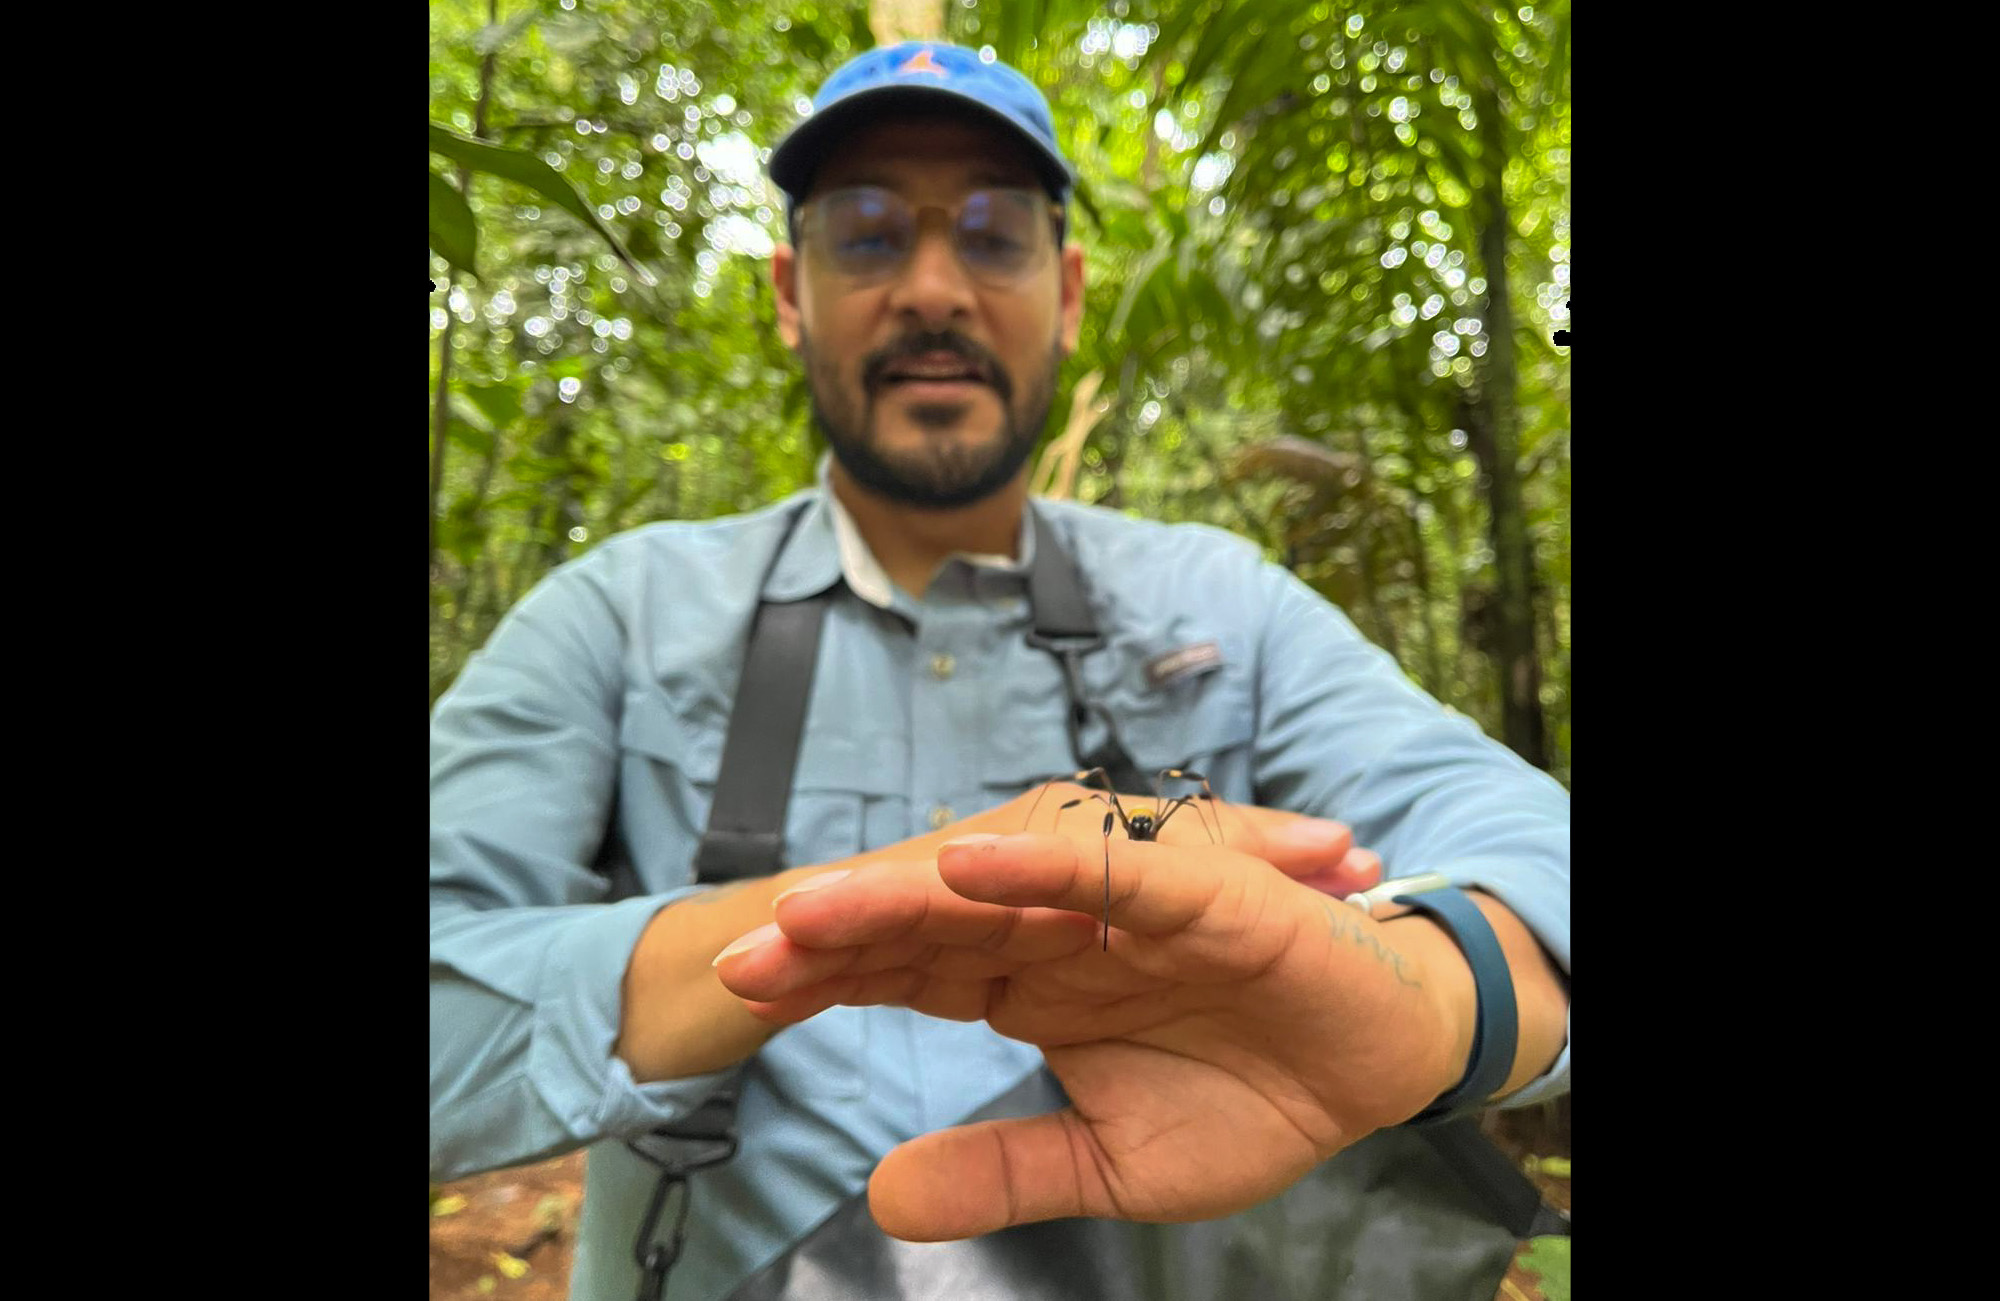 Third-grade teacher Blas Antimo Perez of Milwaukee poses with a spider in the rainforest of Panama.